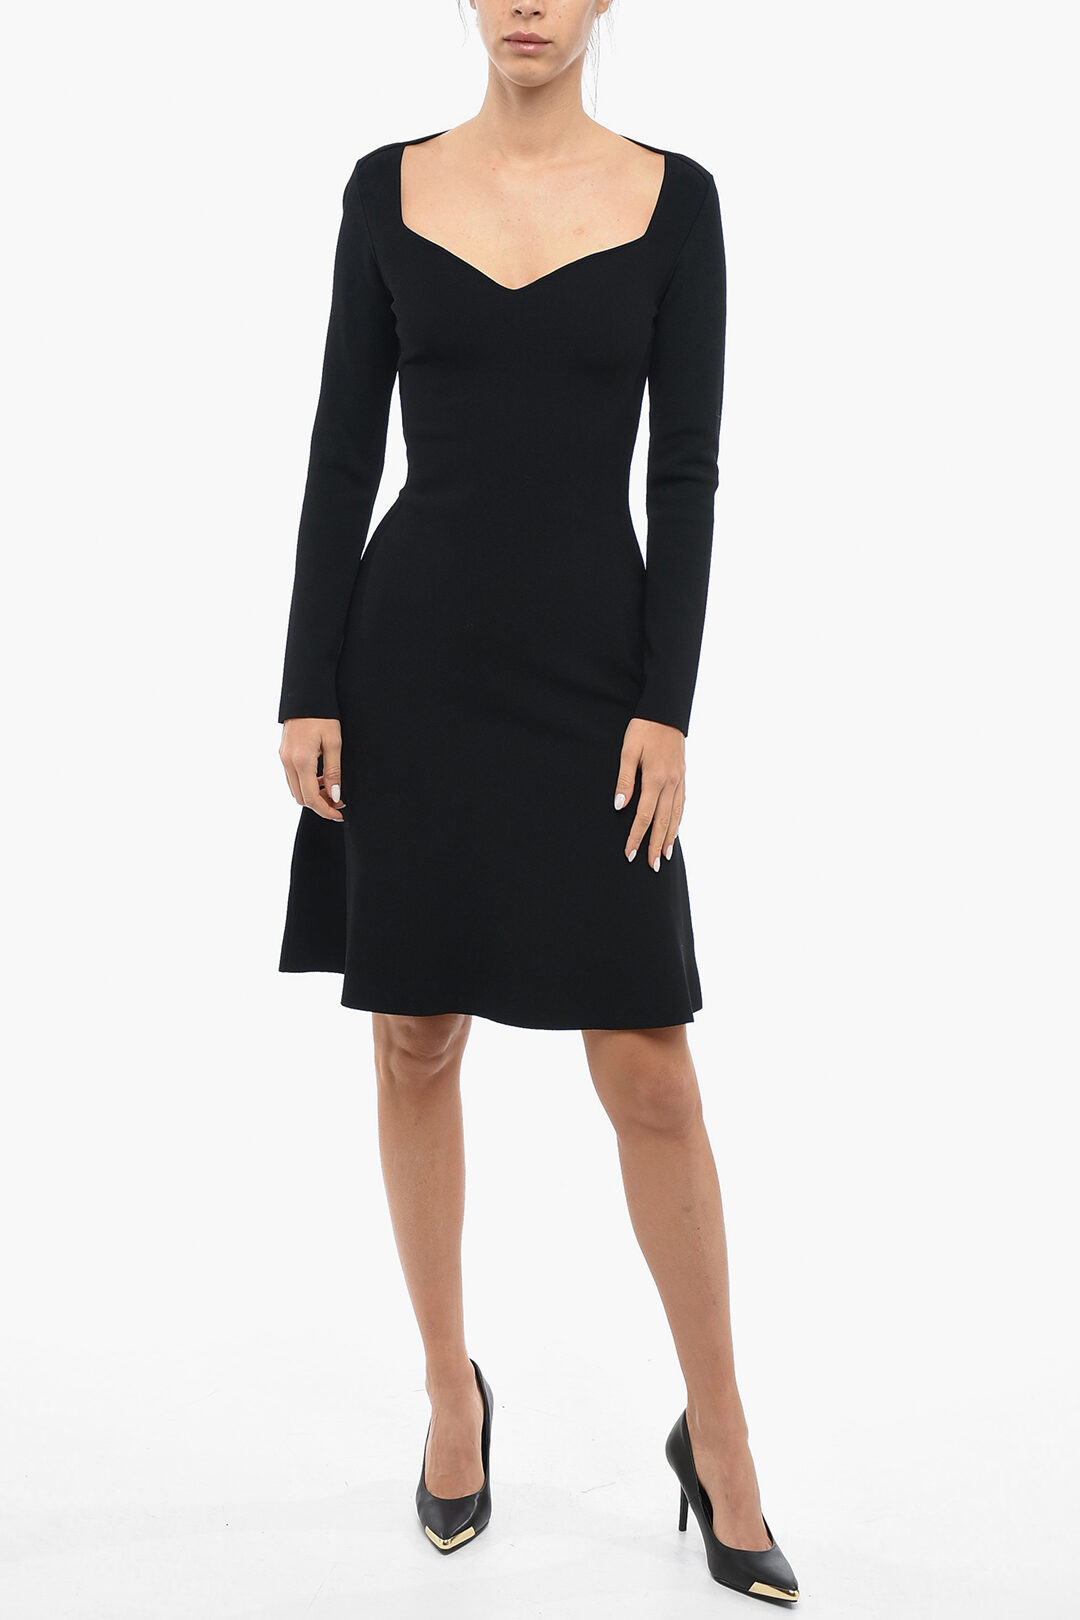 Stella McCartney Flared Dress with Sweetheart Neck women - Glamood Outlet